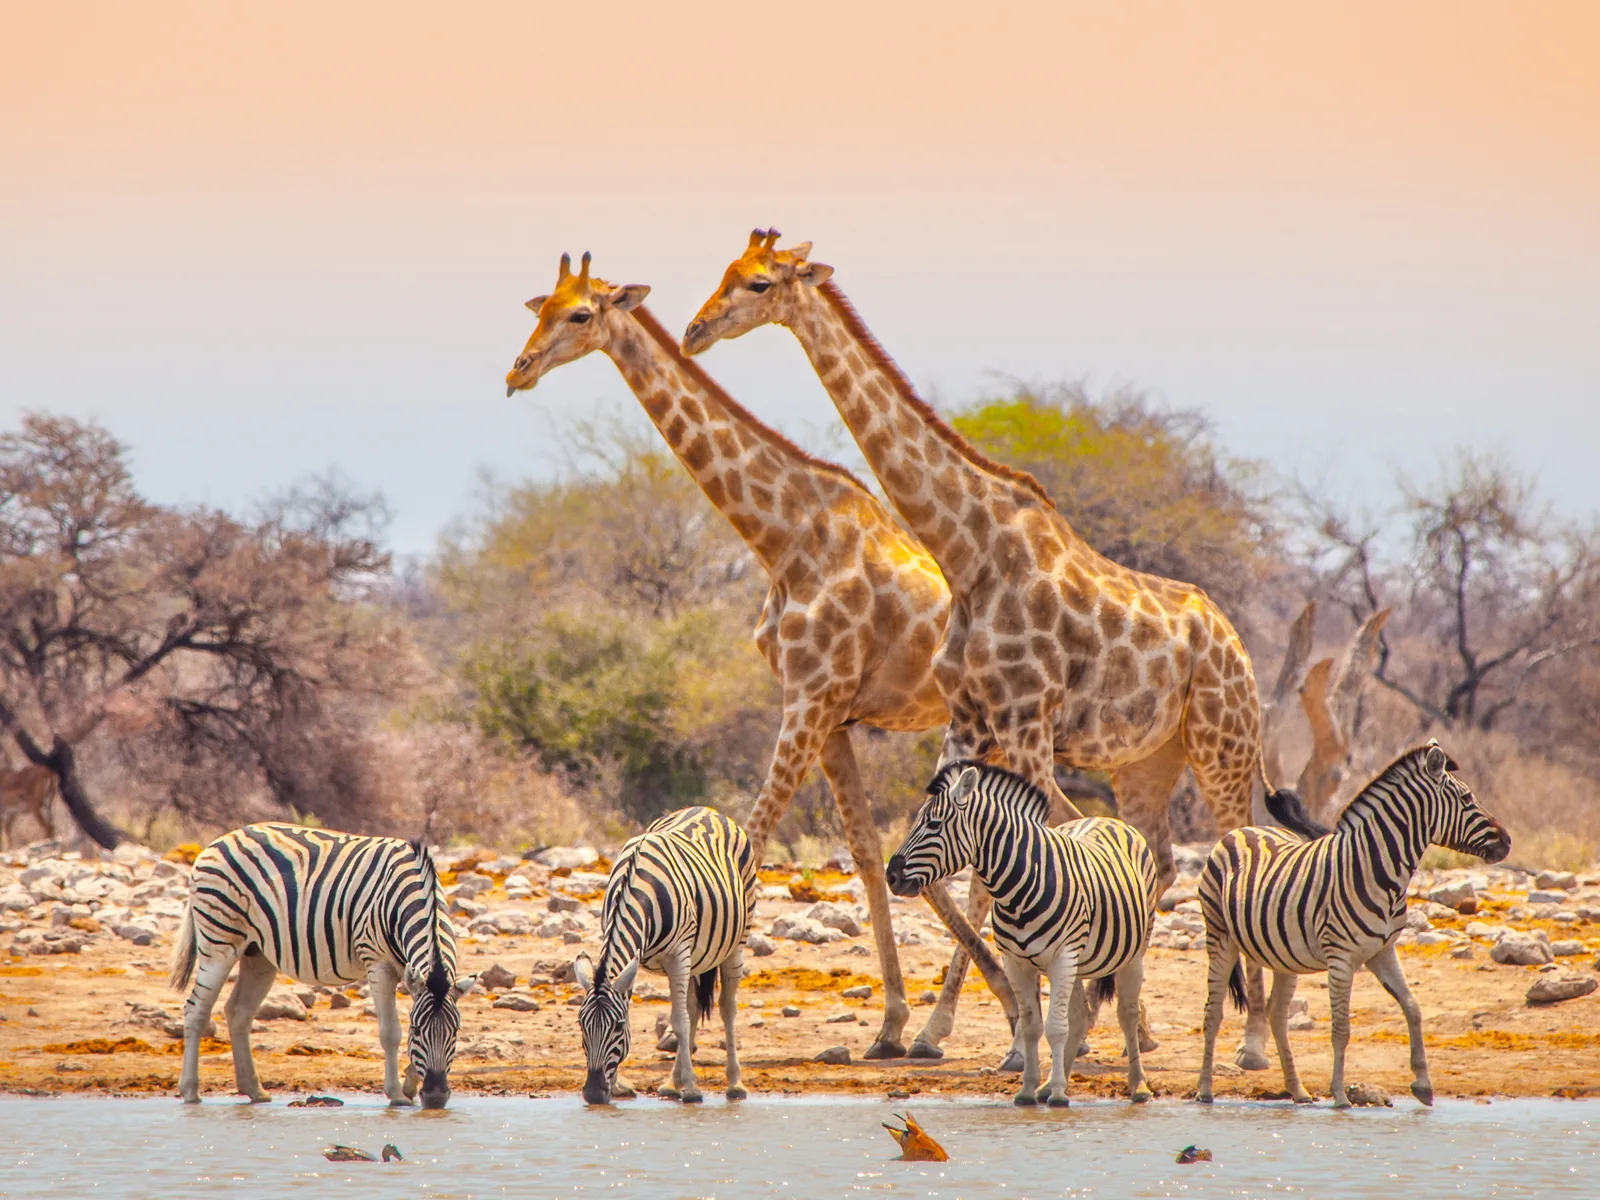 Two giraffes and four zebras at one of Africa's best safaris, Etosha National Park